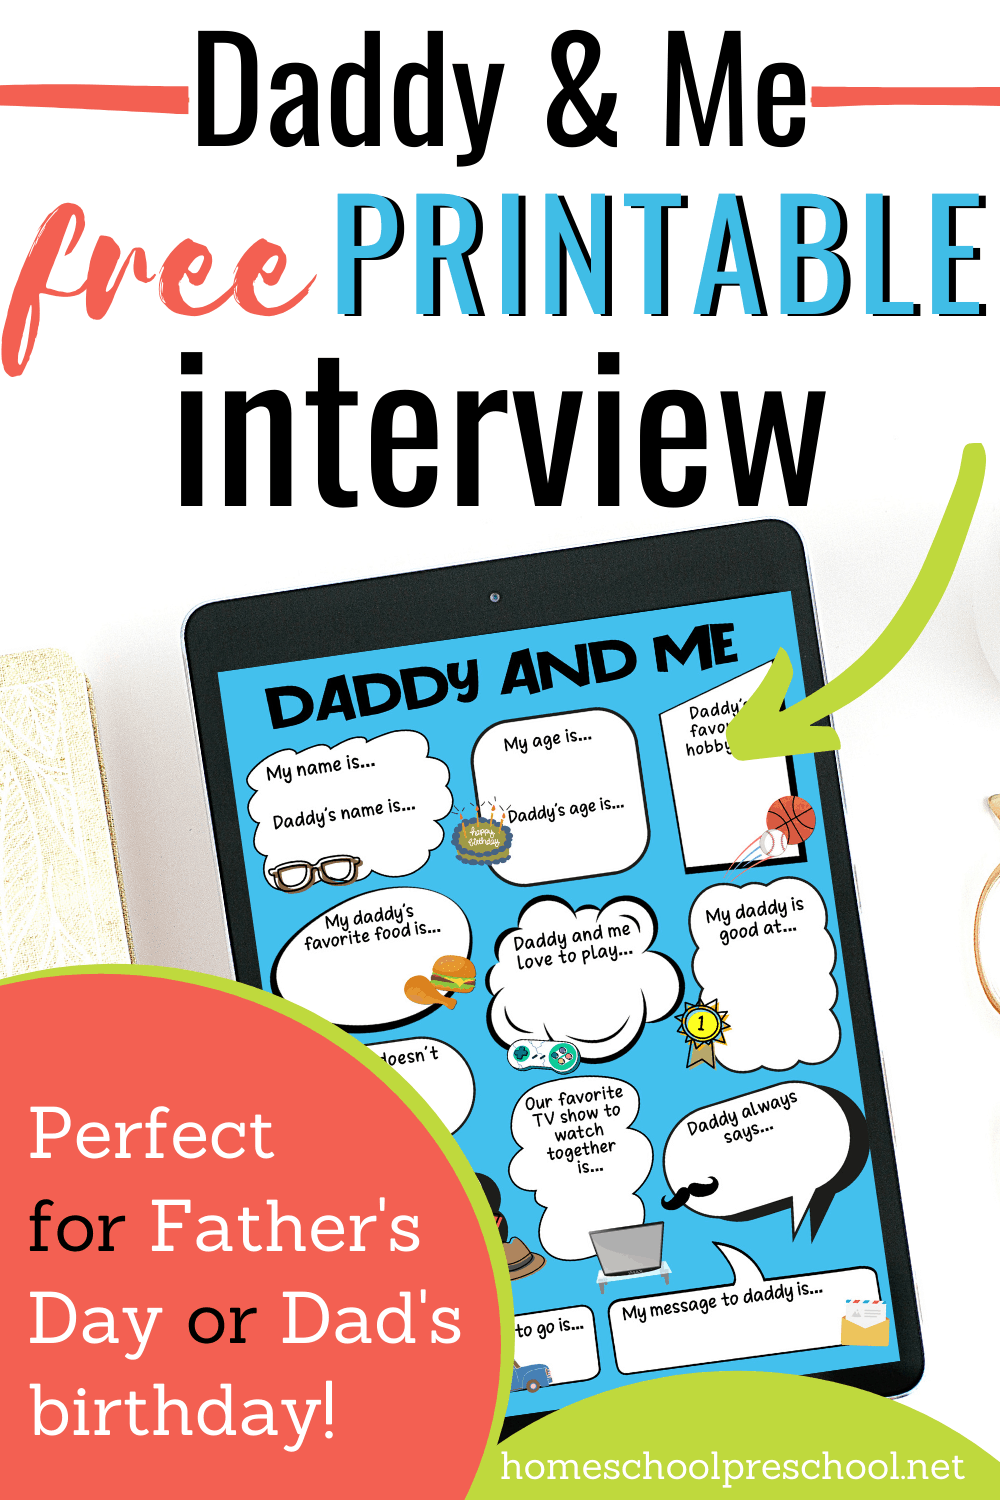 Print out this free Daddy and Me Fathers Day preschool interview! It's the perfect gift for any dad this Father's Day and makes a sweet keepsake!